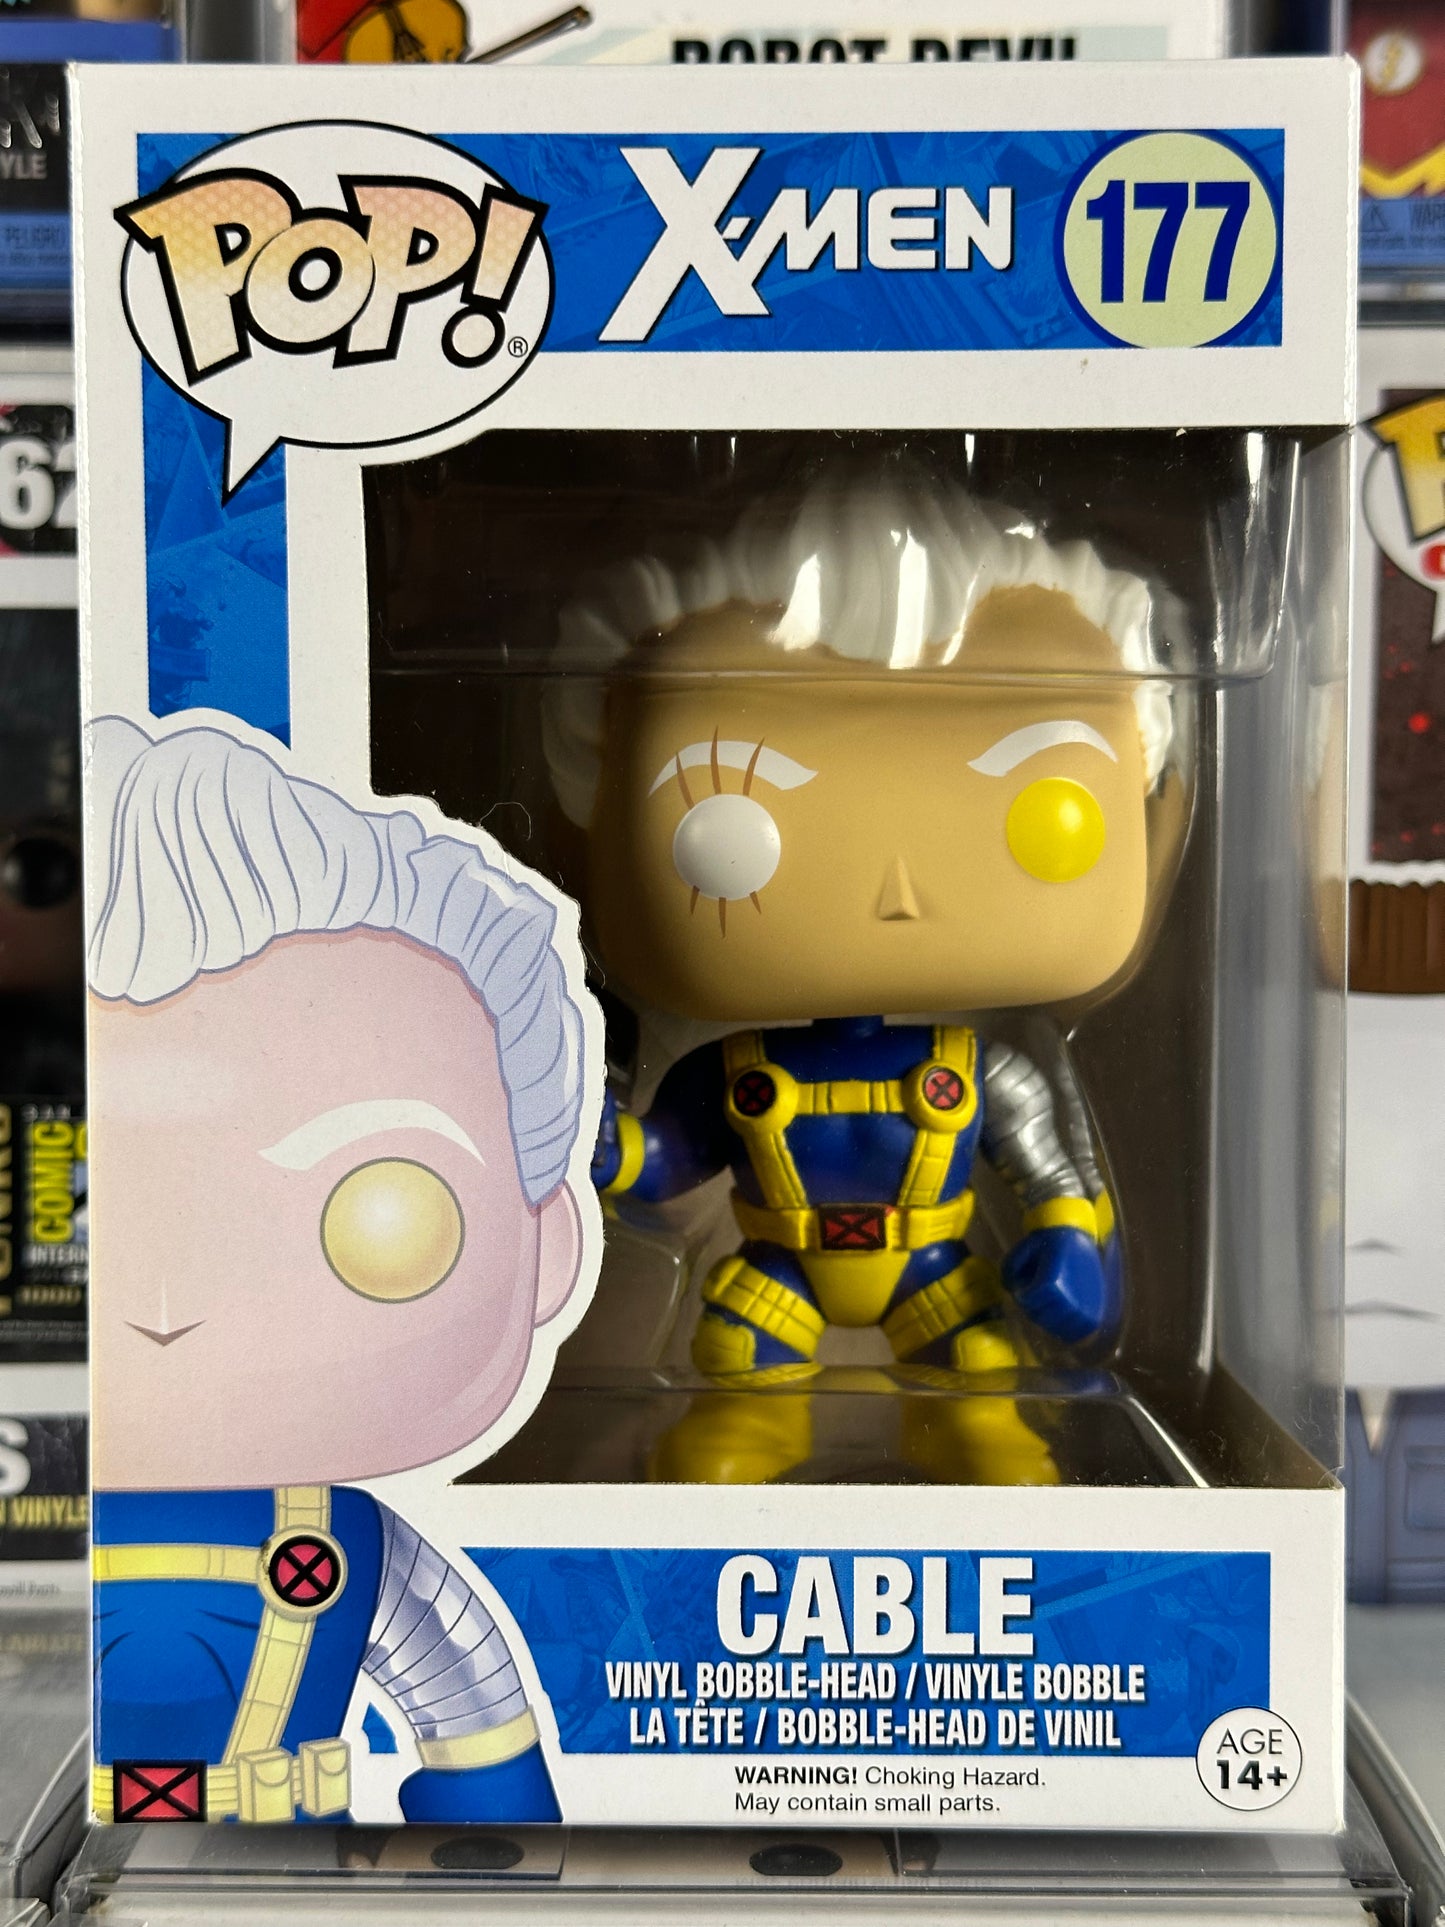 Marvel X-Men - Cable (177) Vaulted